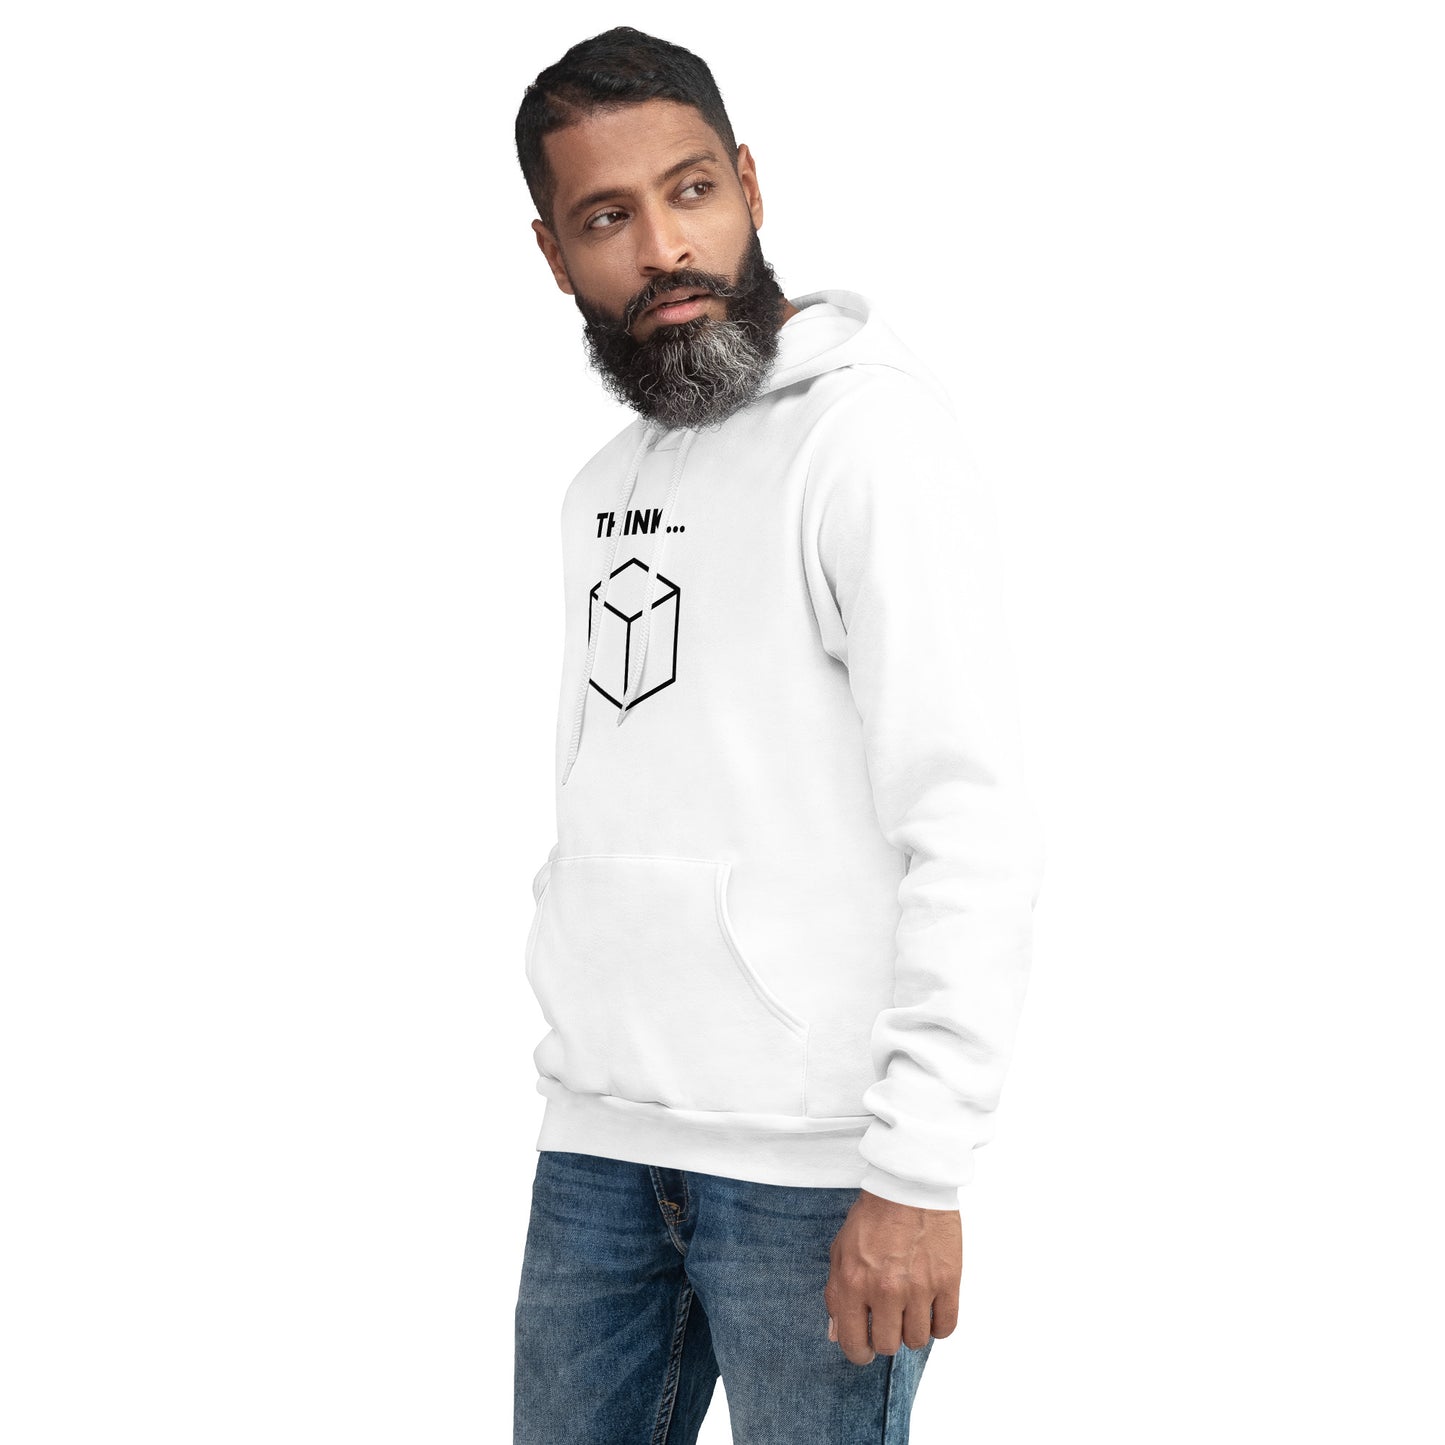 Think Outta The Box Unisex Hoodie